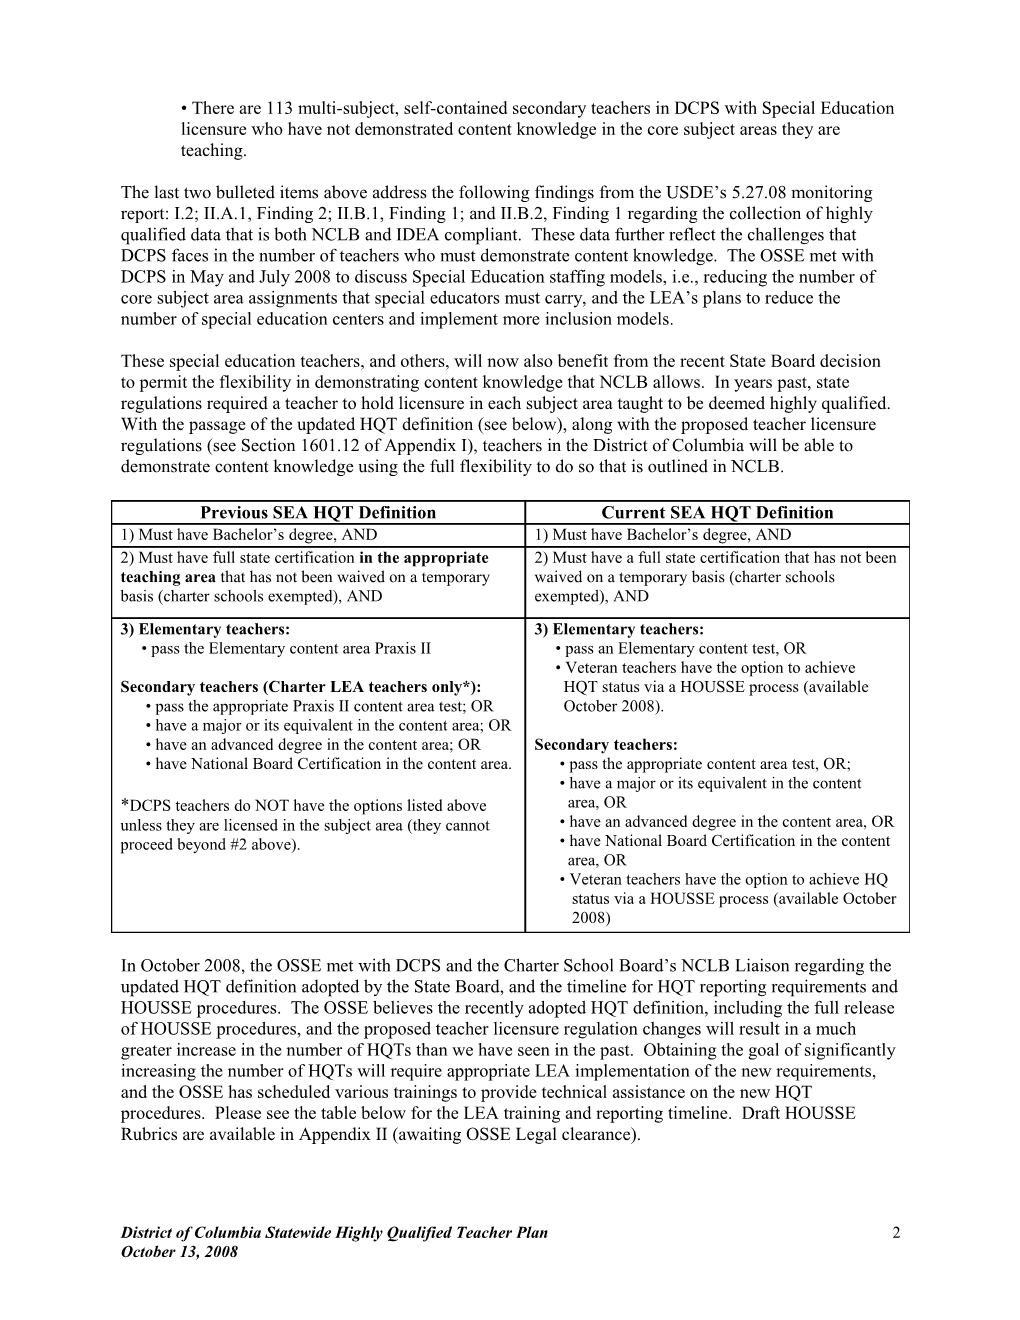 District of Columbia Statewide Highly Qualified Teacher Plan (MS Word)